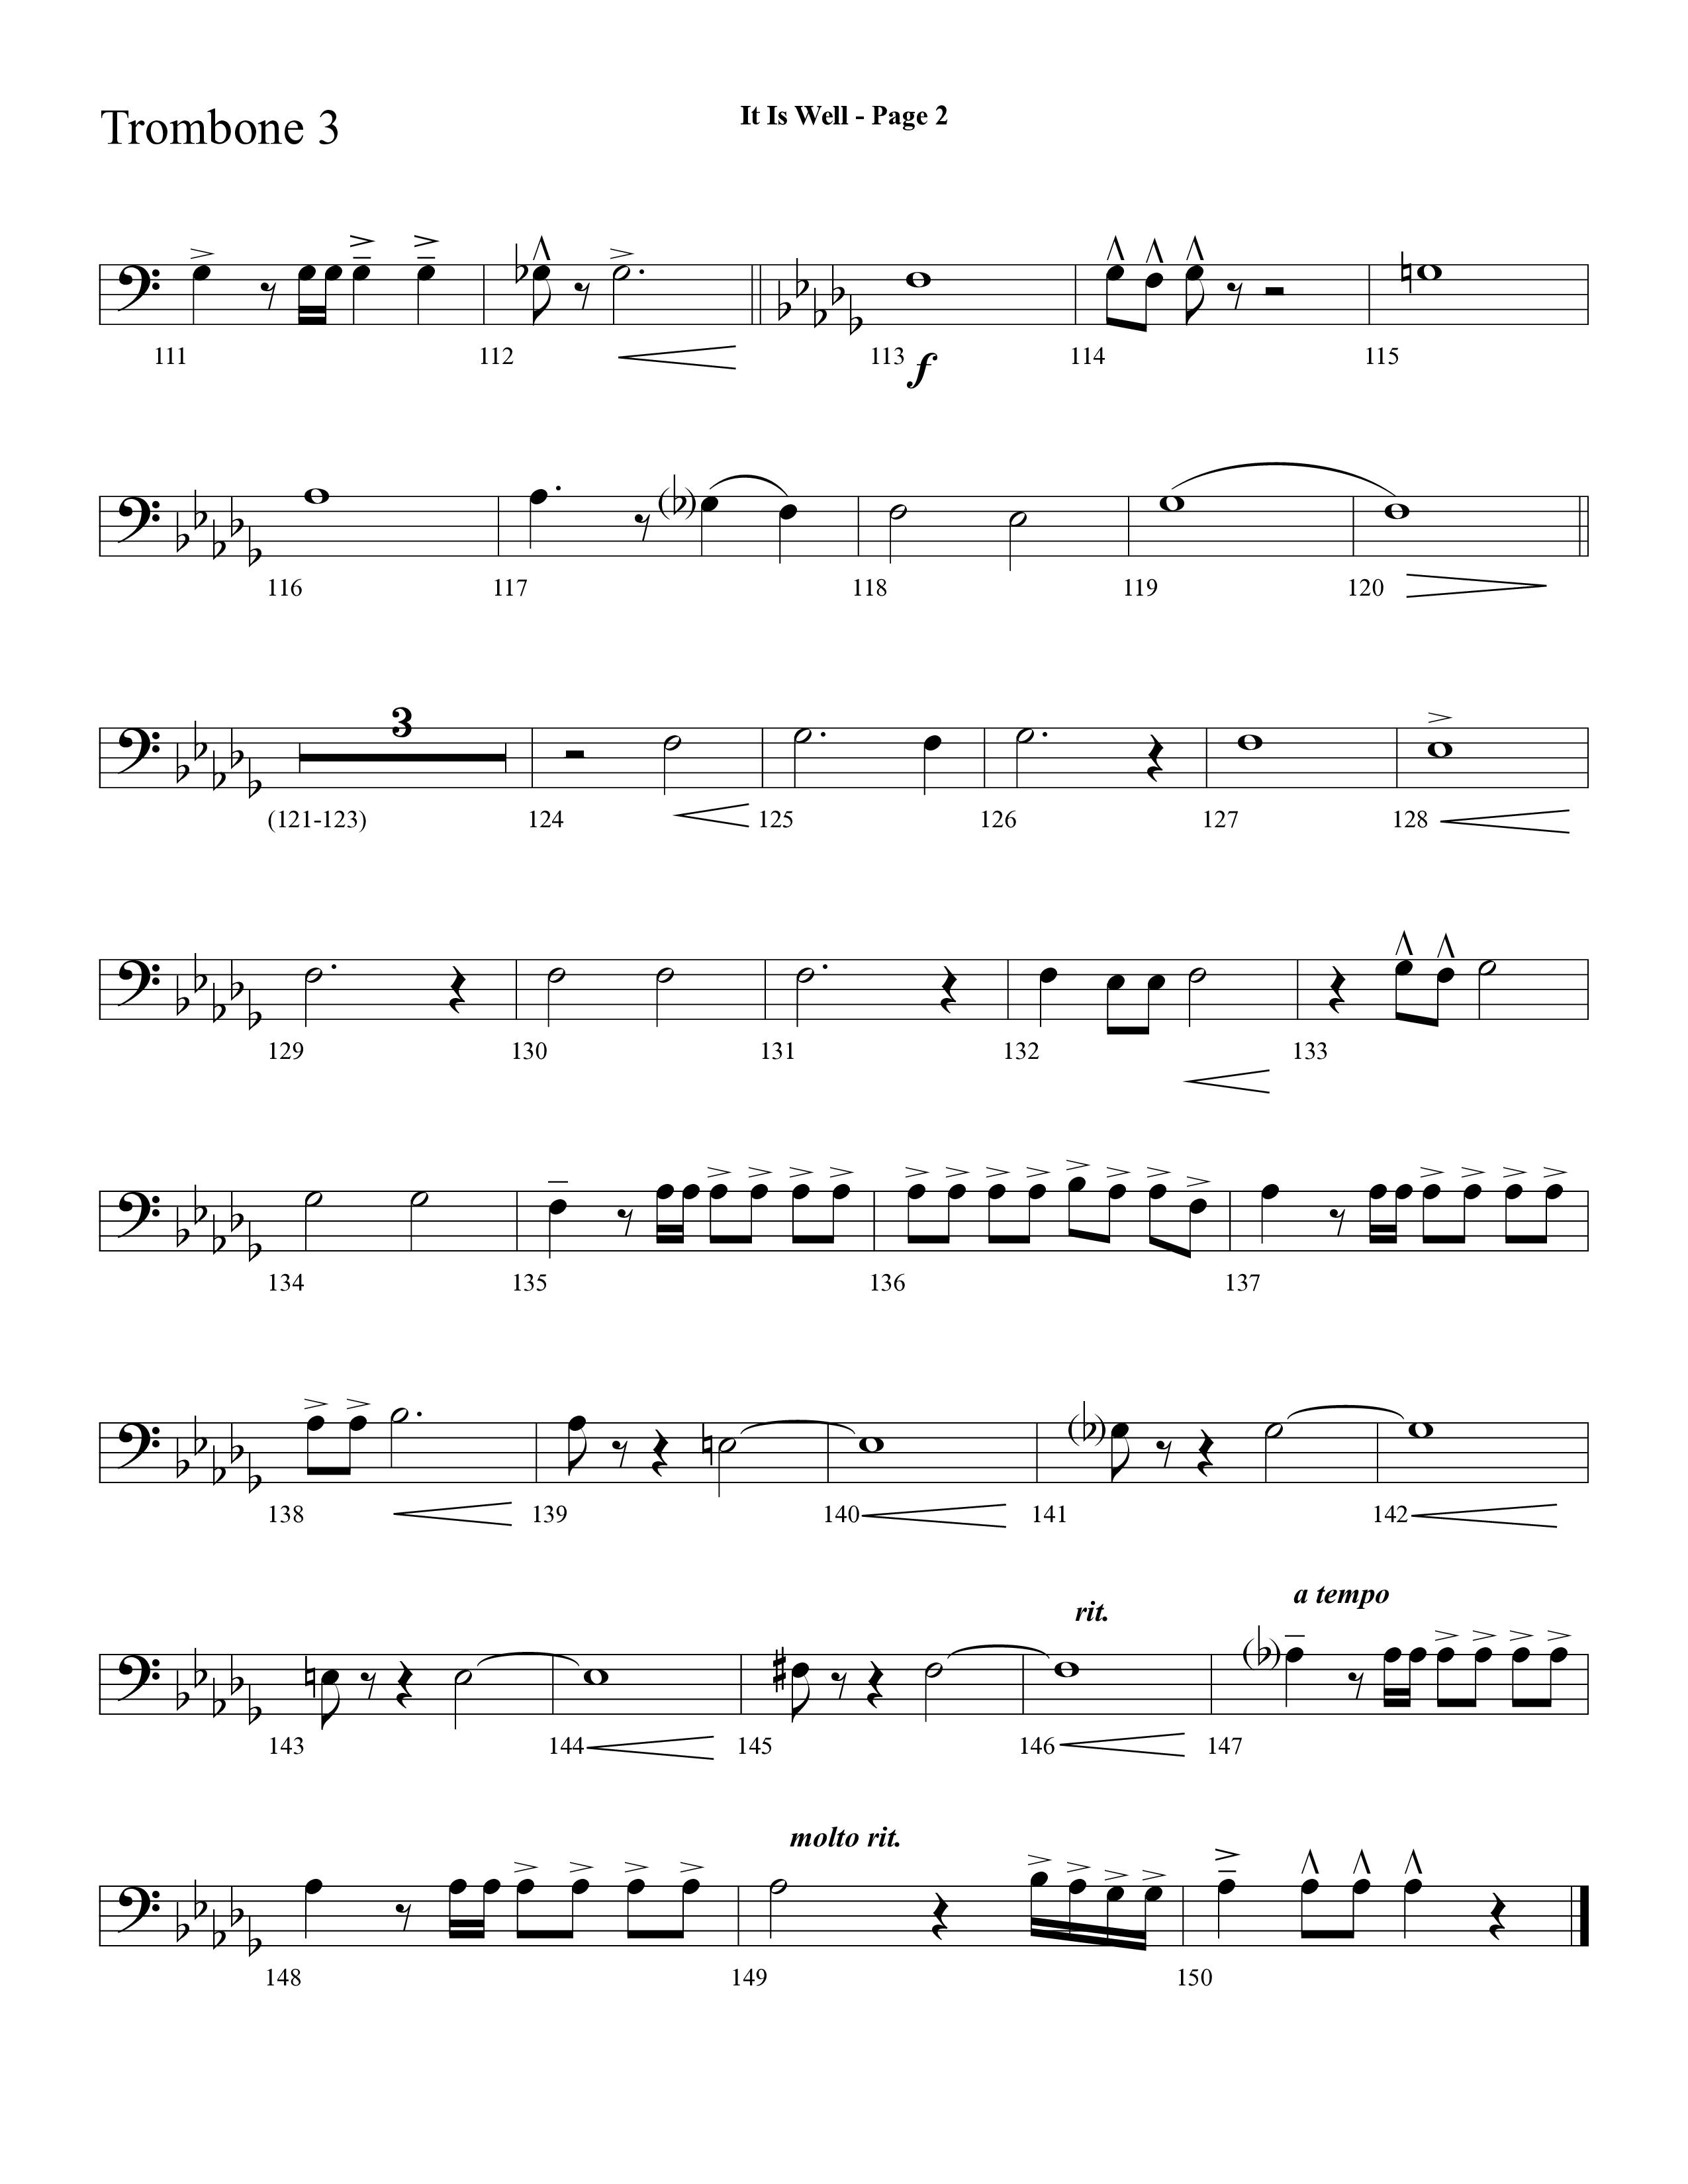 It Is Well (Choral Anthem SATB) Trombone 3 (Lifeway Choral / Arr. Dave Williamson)